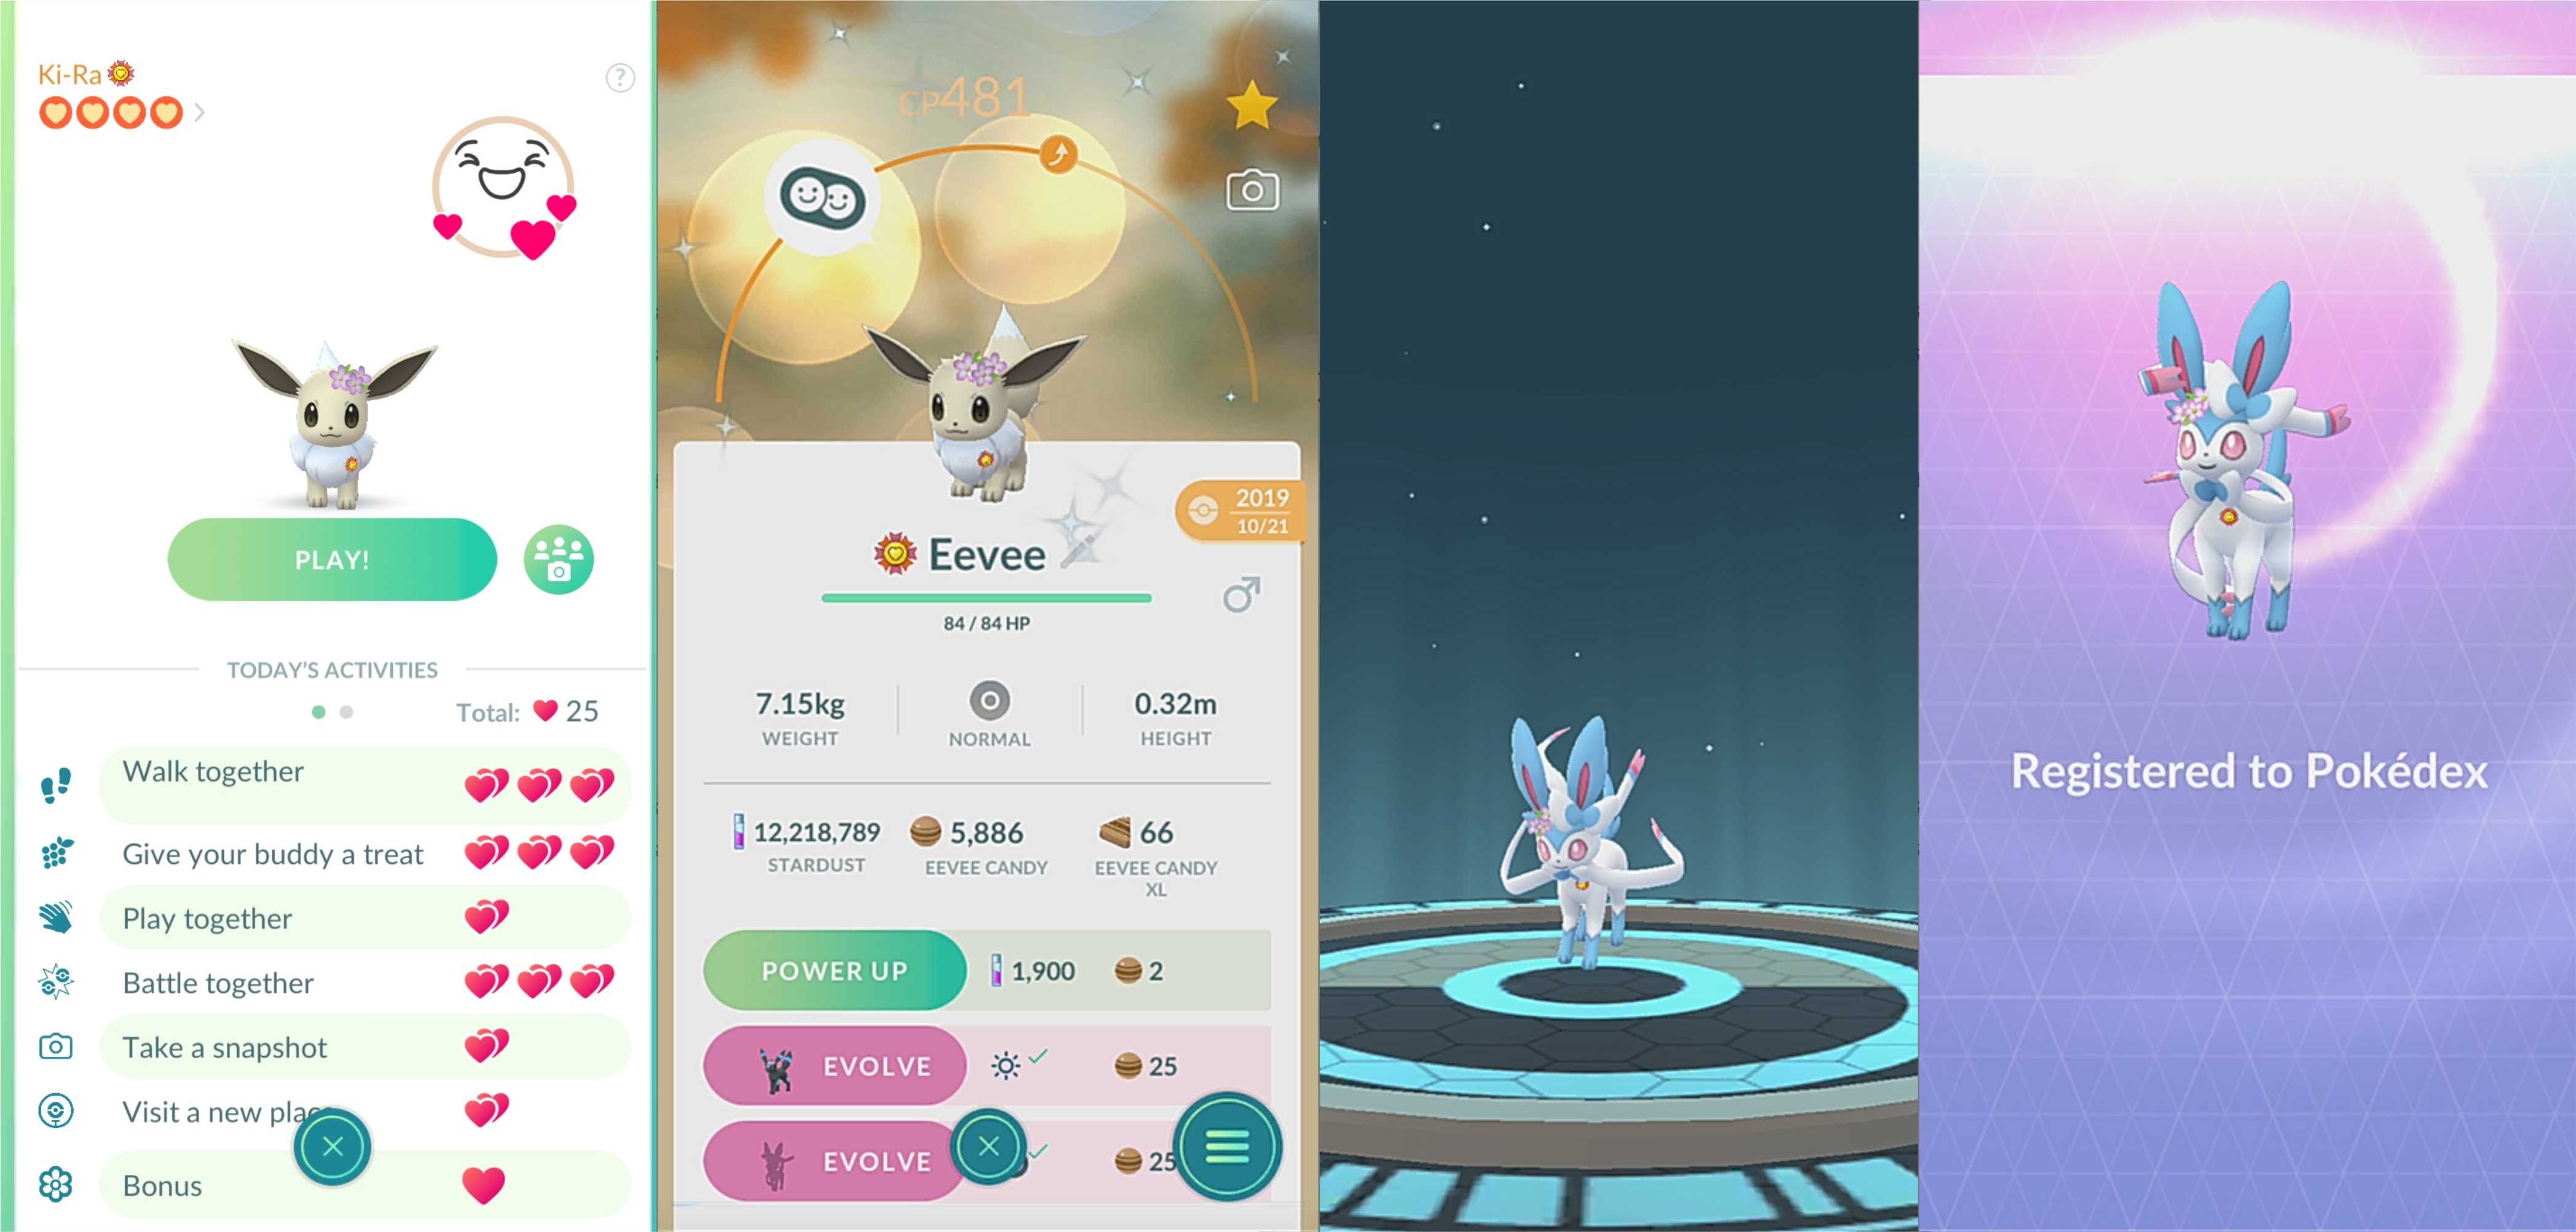 How do I evolve my Eevee to Sylveon without the name trick? Have